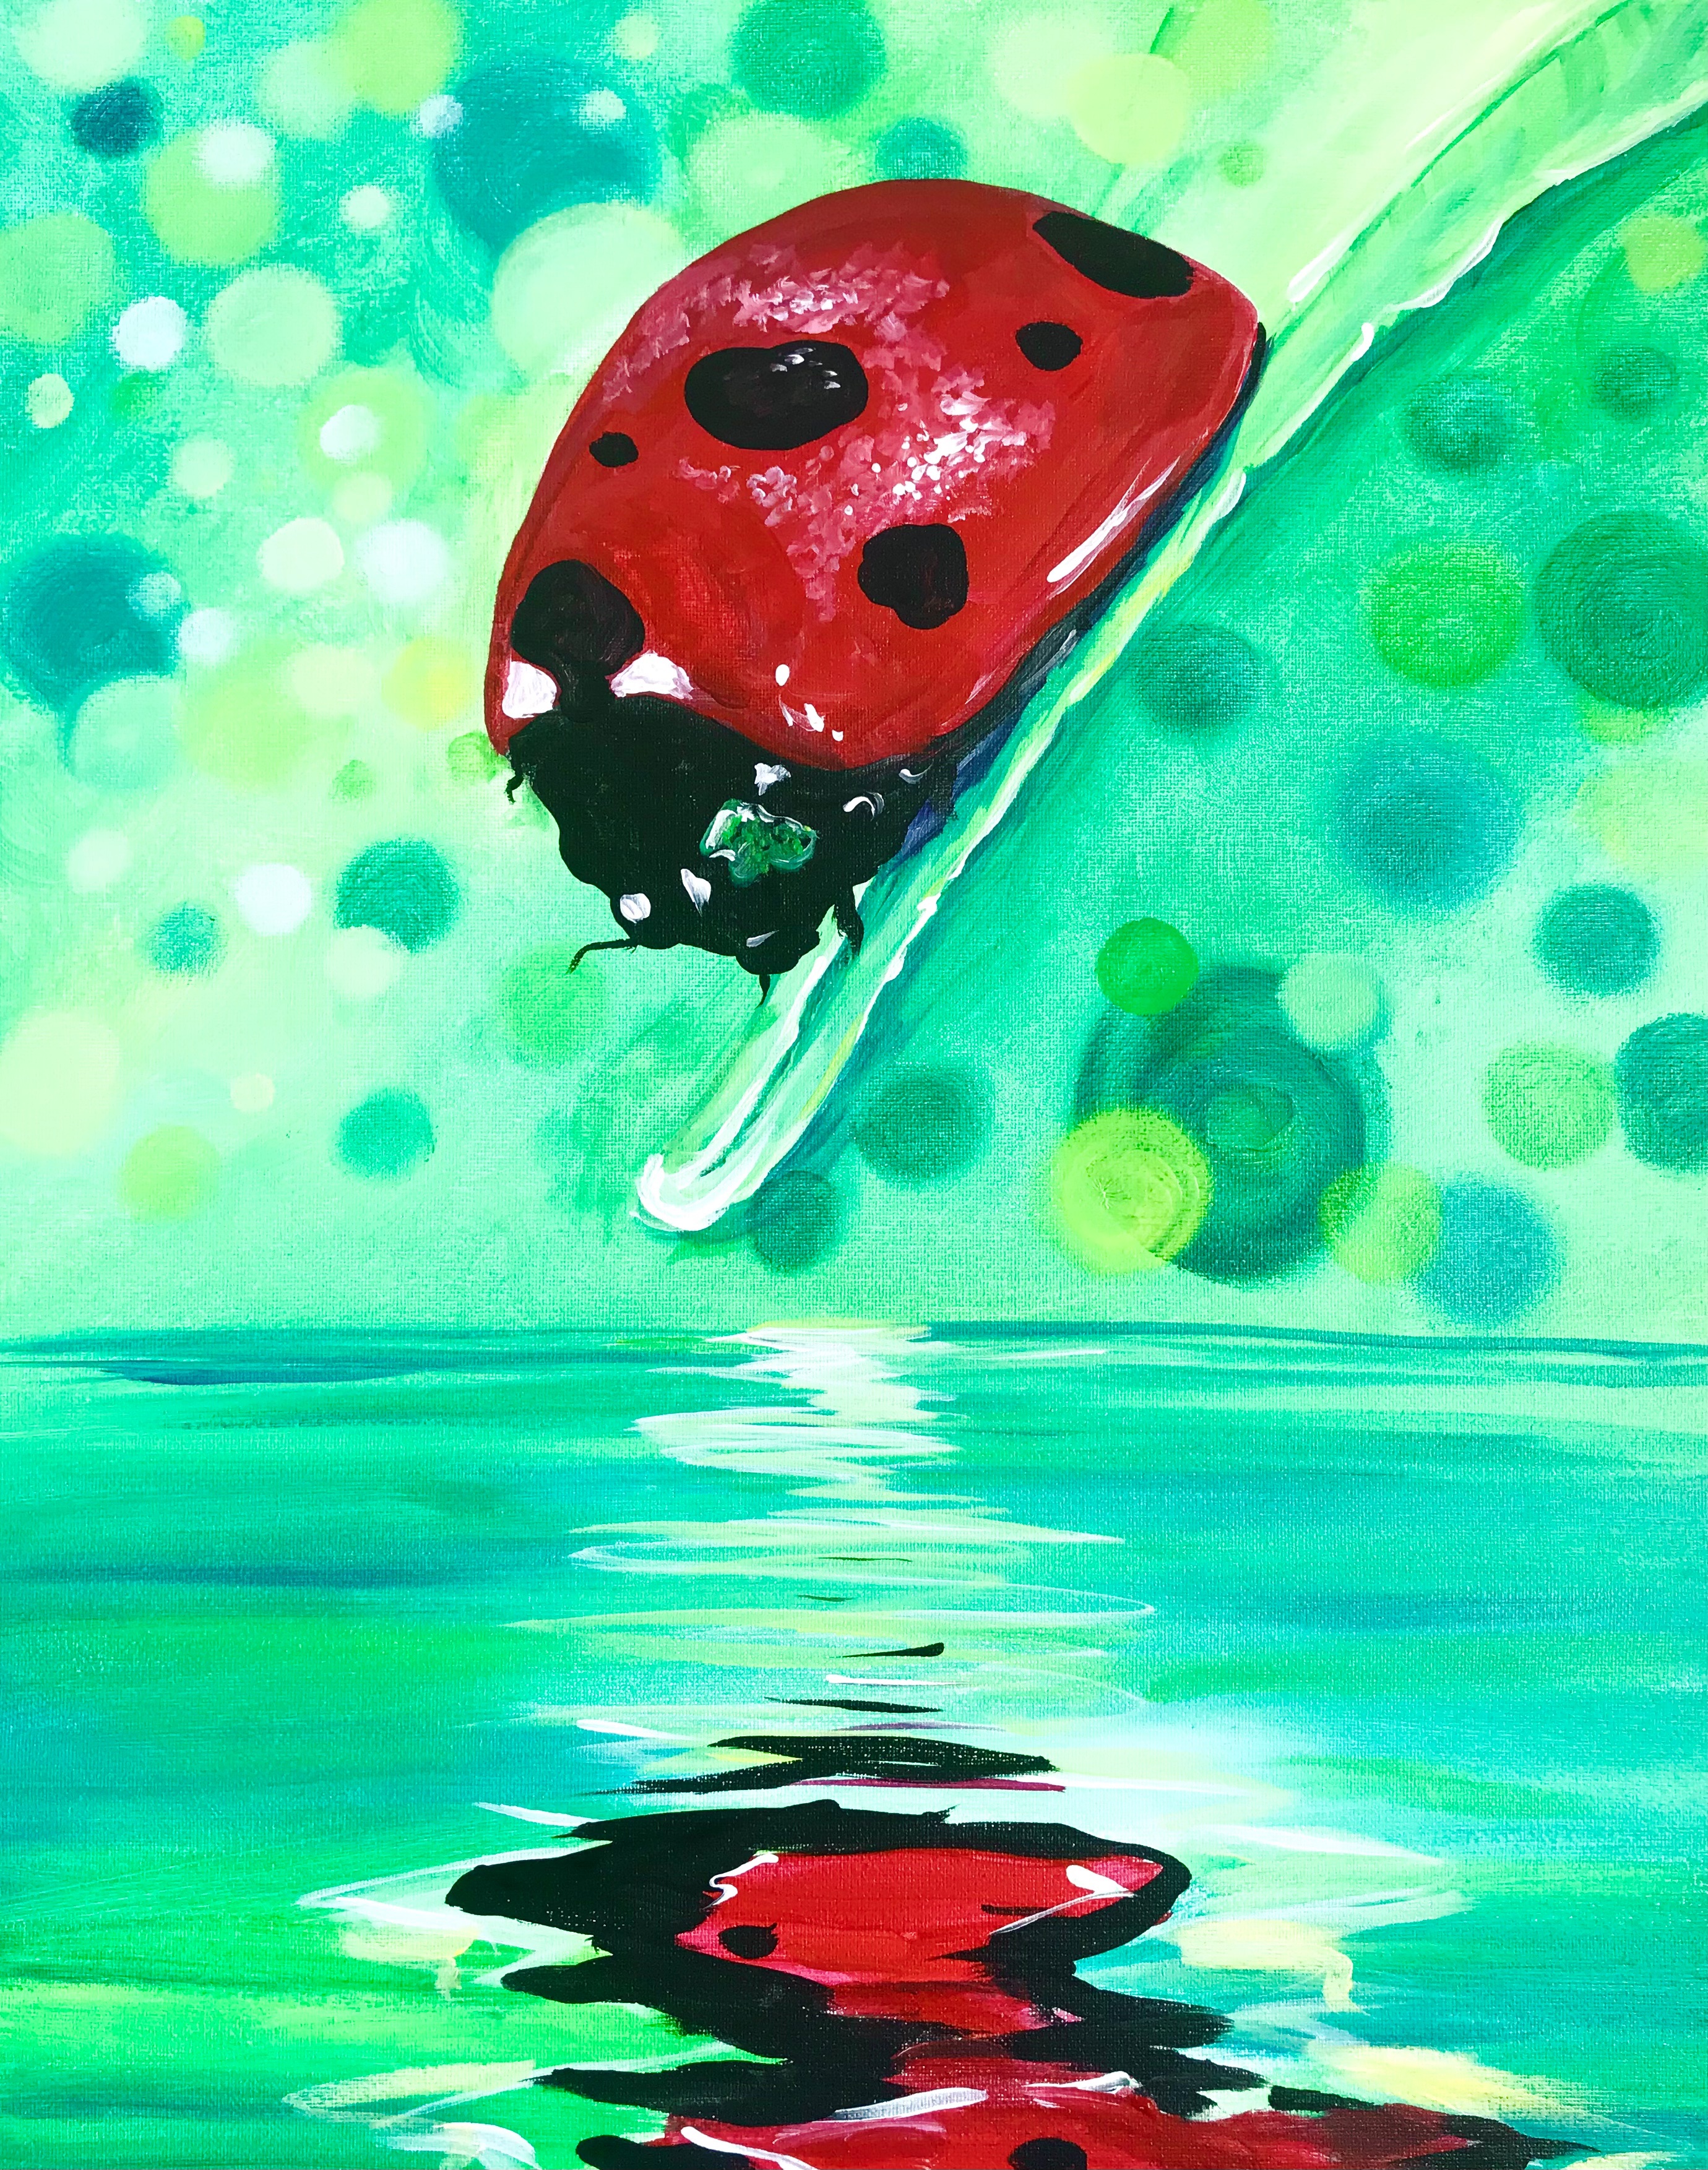 A Reflecting Ladybug experience project by Yaymaker